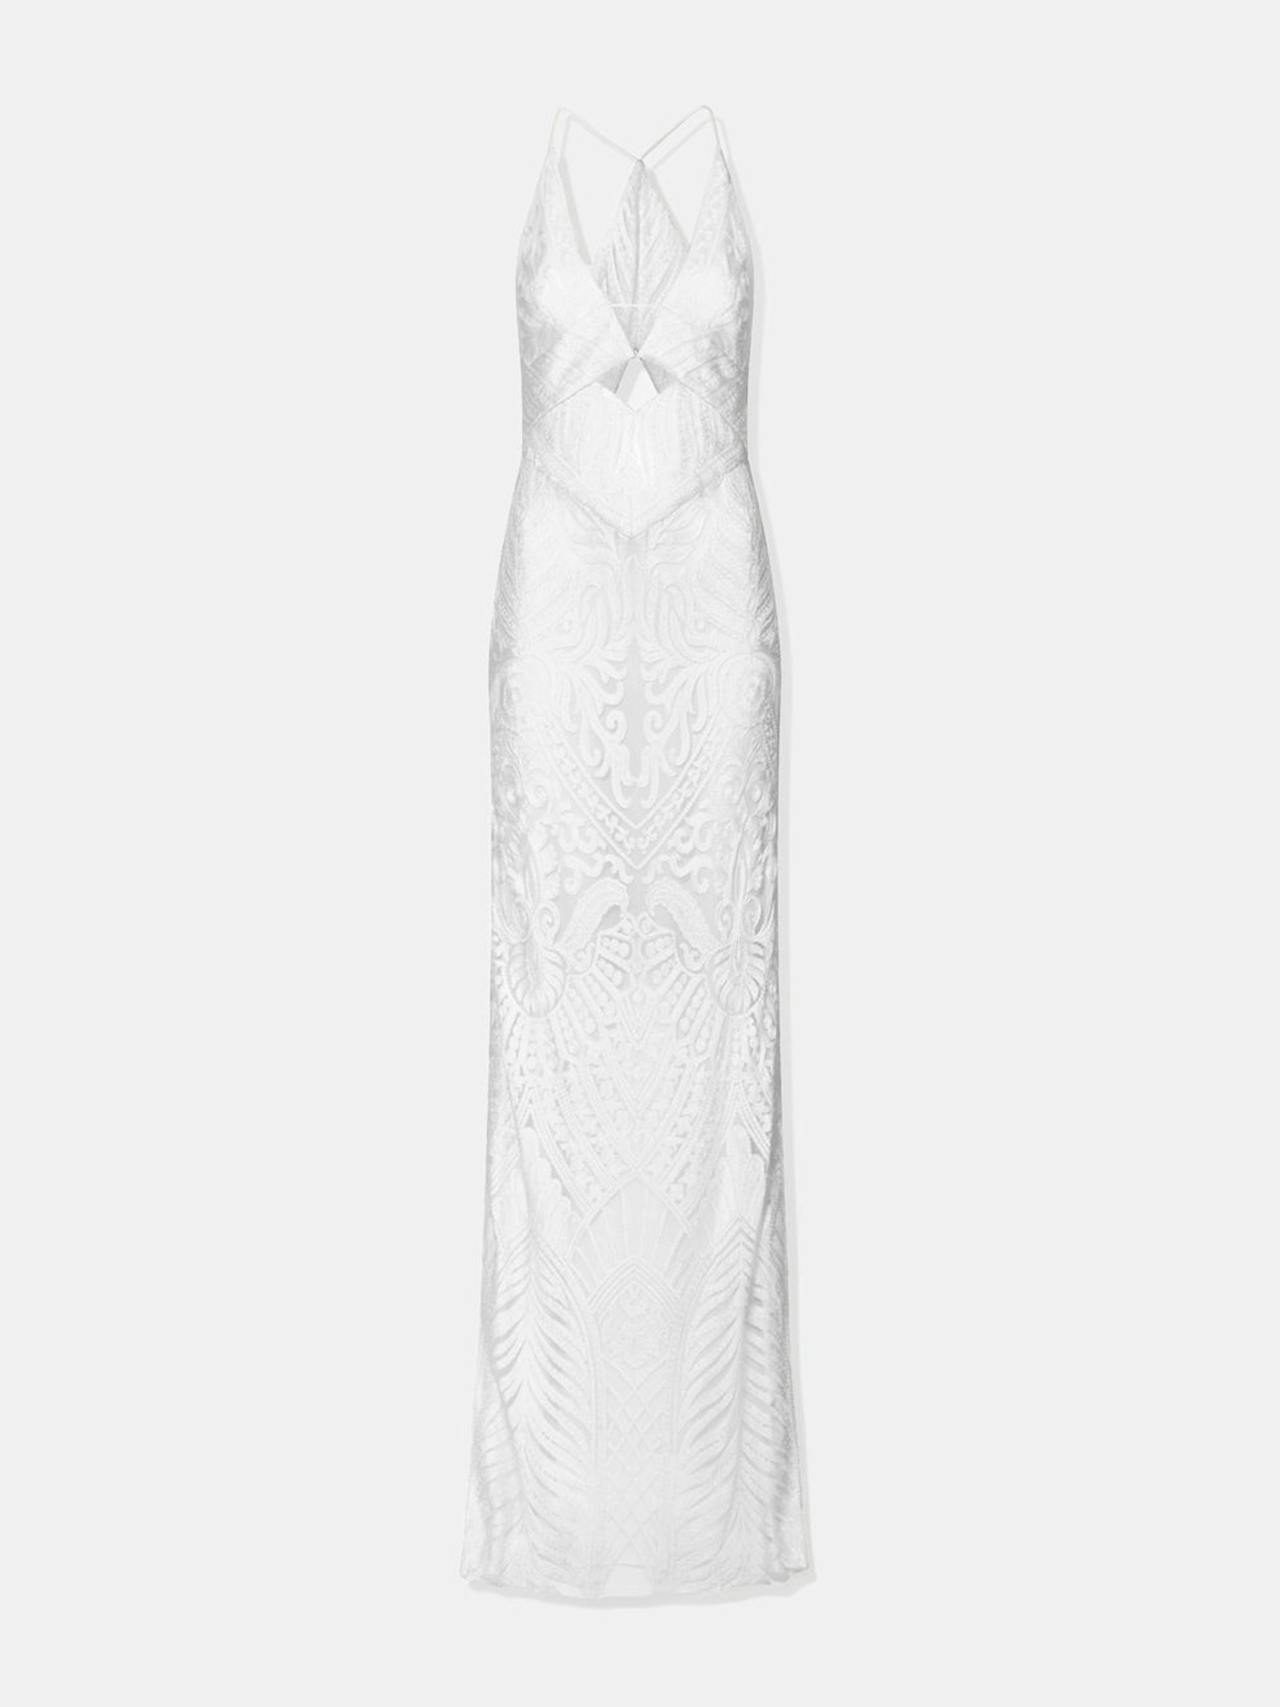 Borghese bridal cut out gown